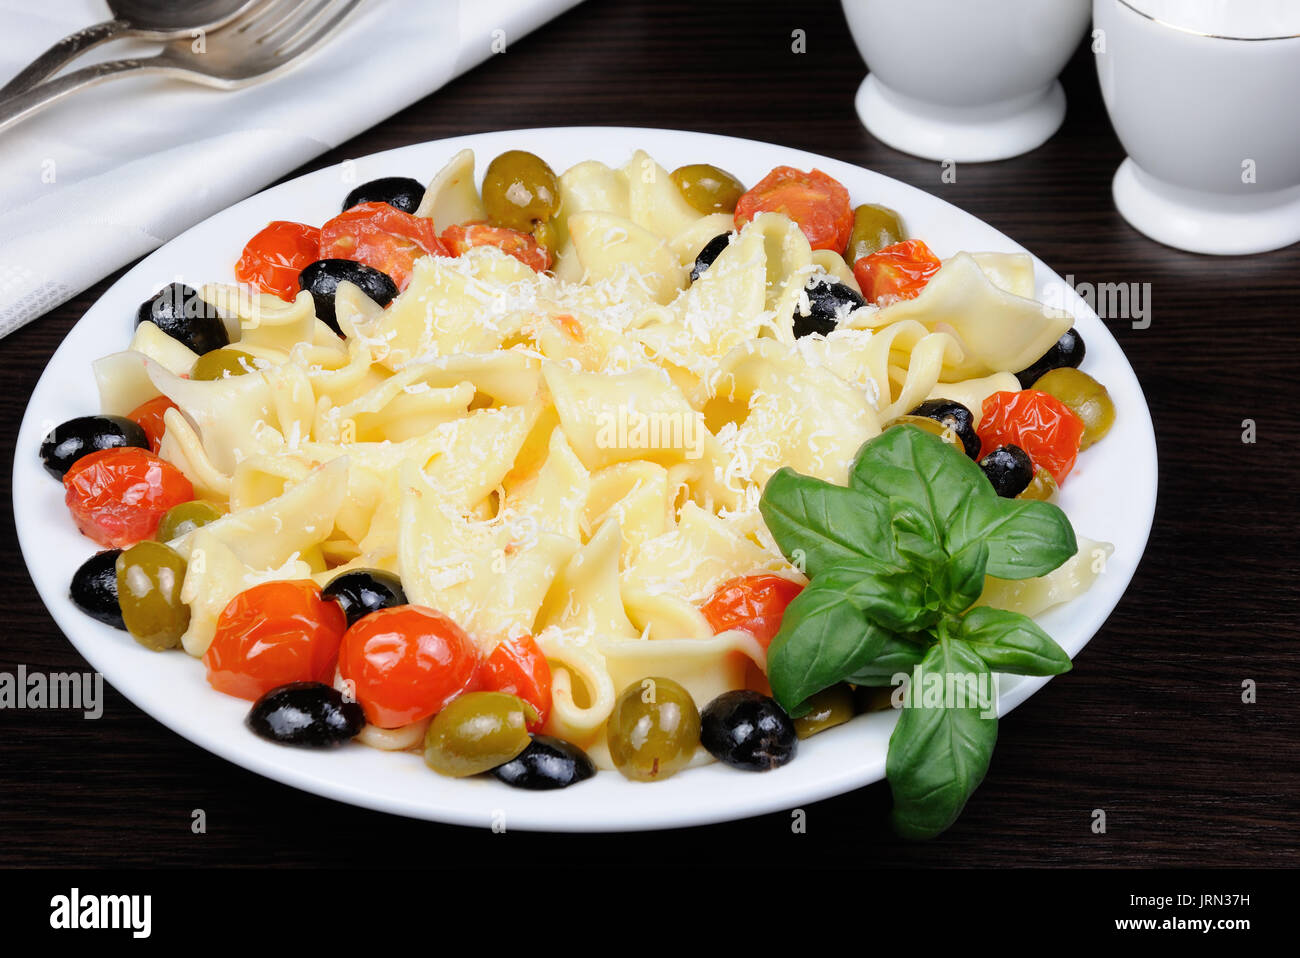 Pasta with olive, garlic, basil and tomatoes and seasoned with Parmesan cheese. Stock Photo